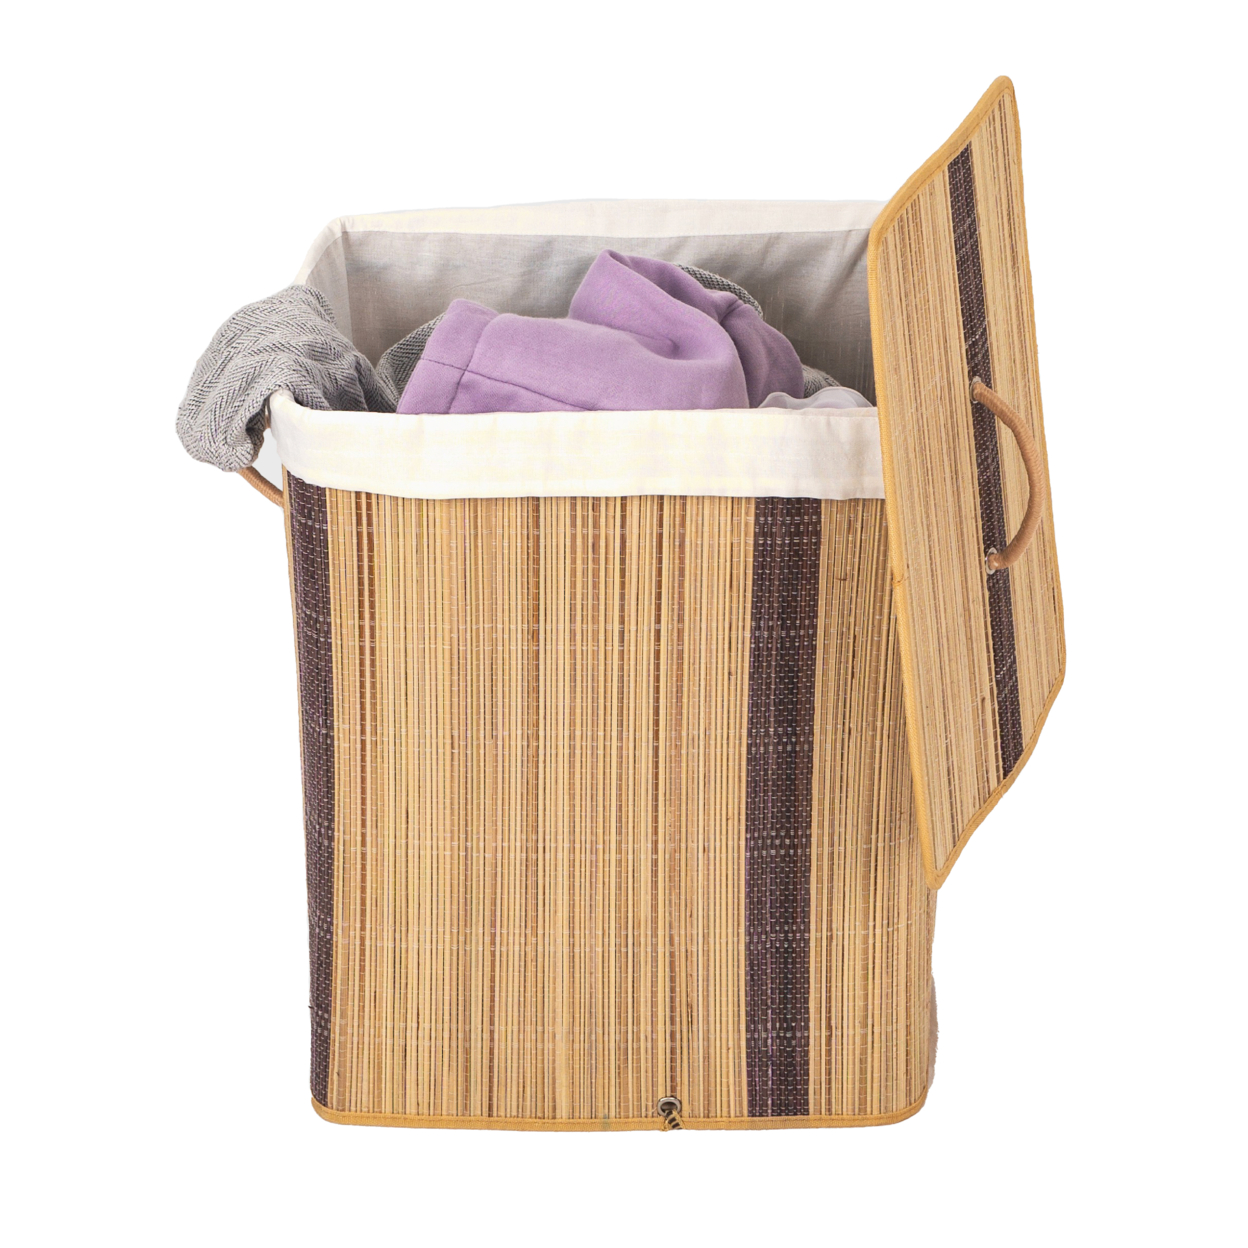 Foldable Laundry Hamper With Lid And Handles For Easy Carrying - Coconut Stick Rectangle